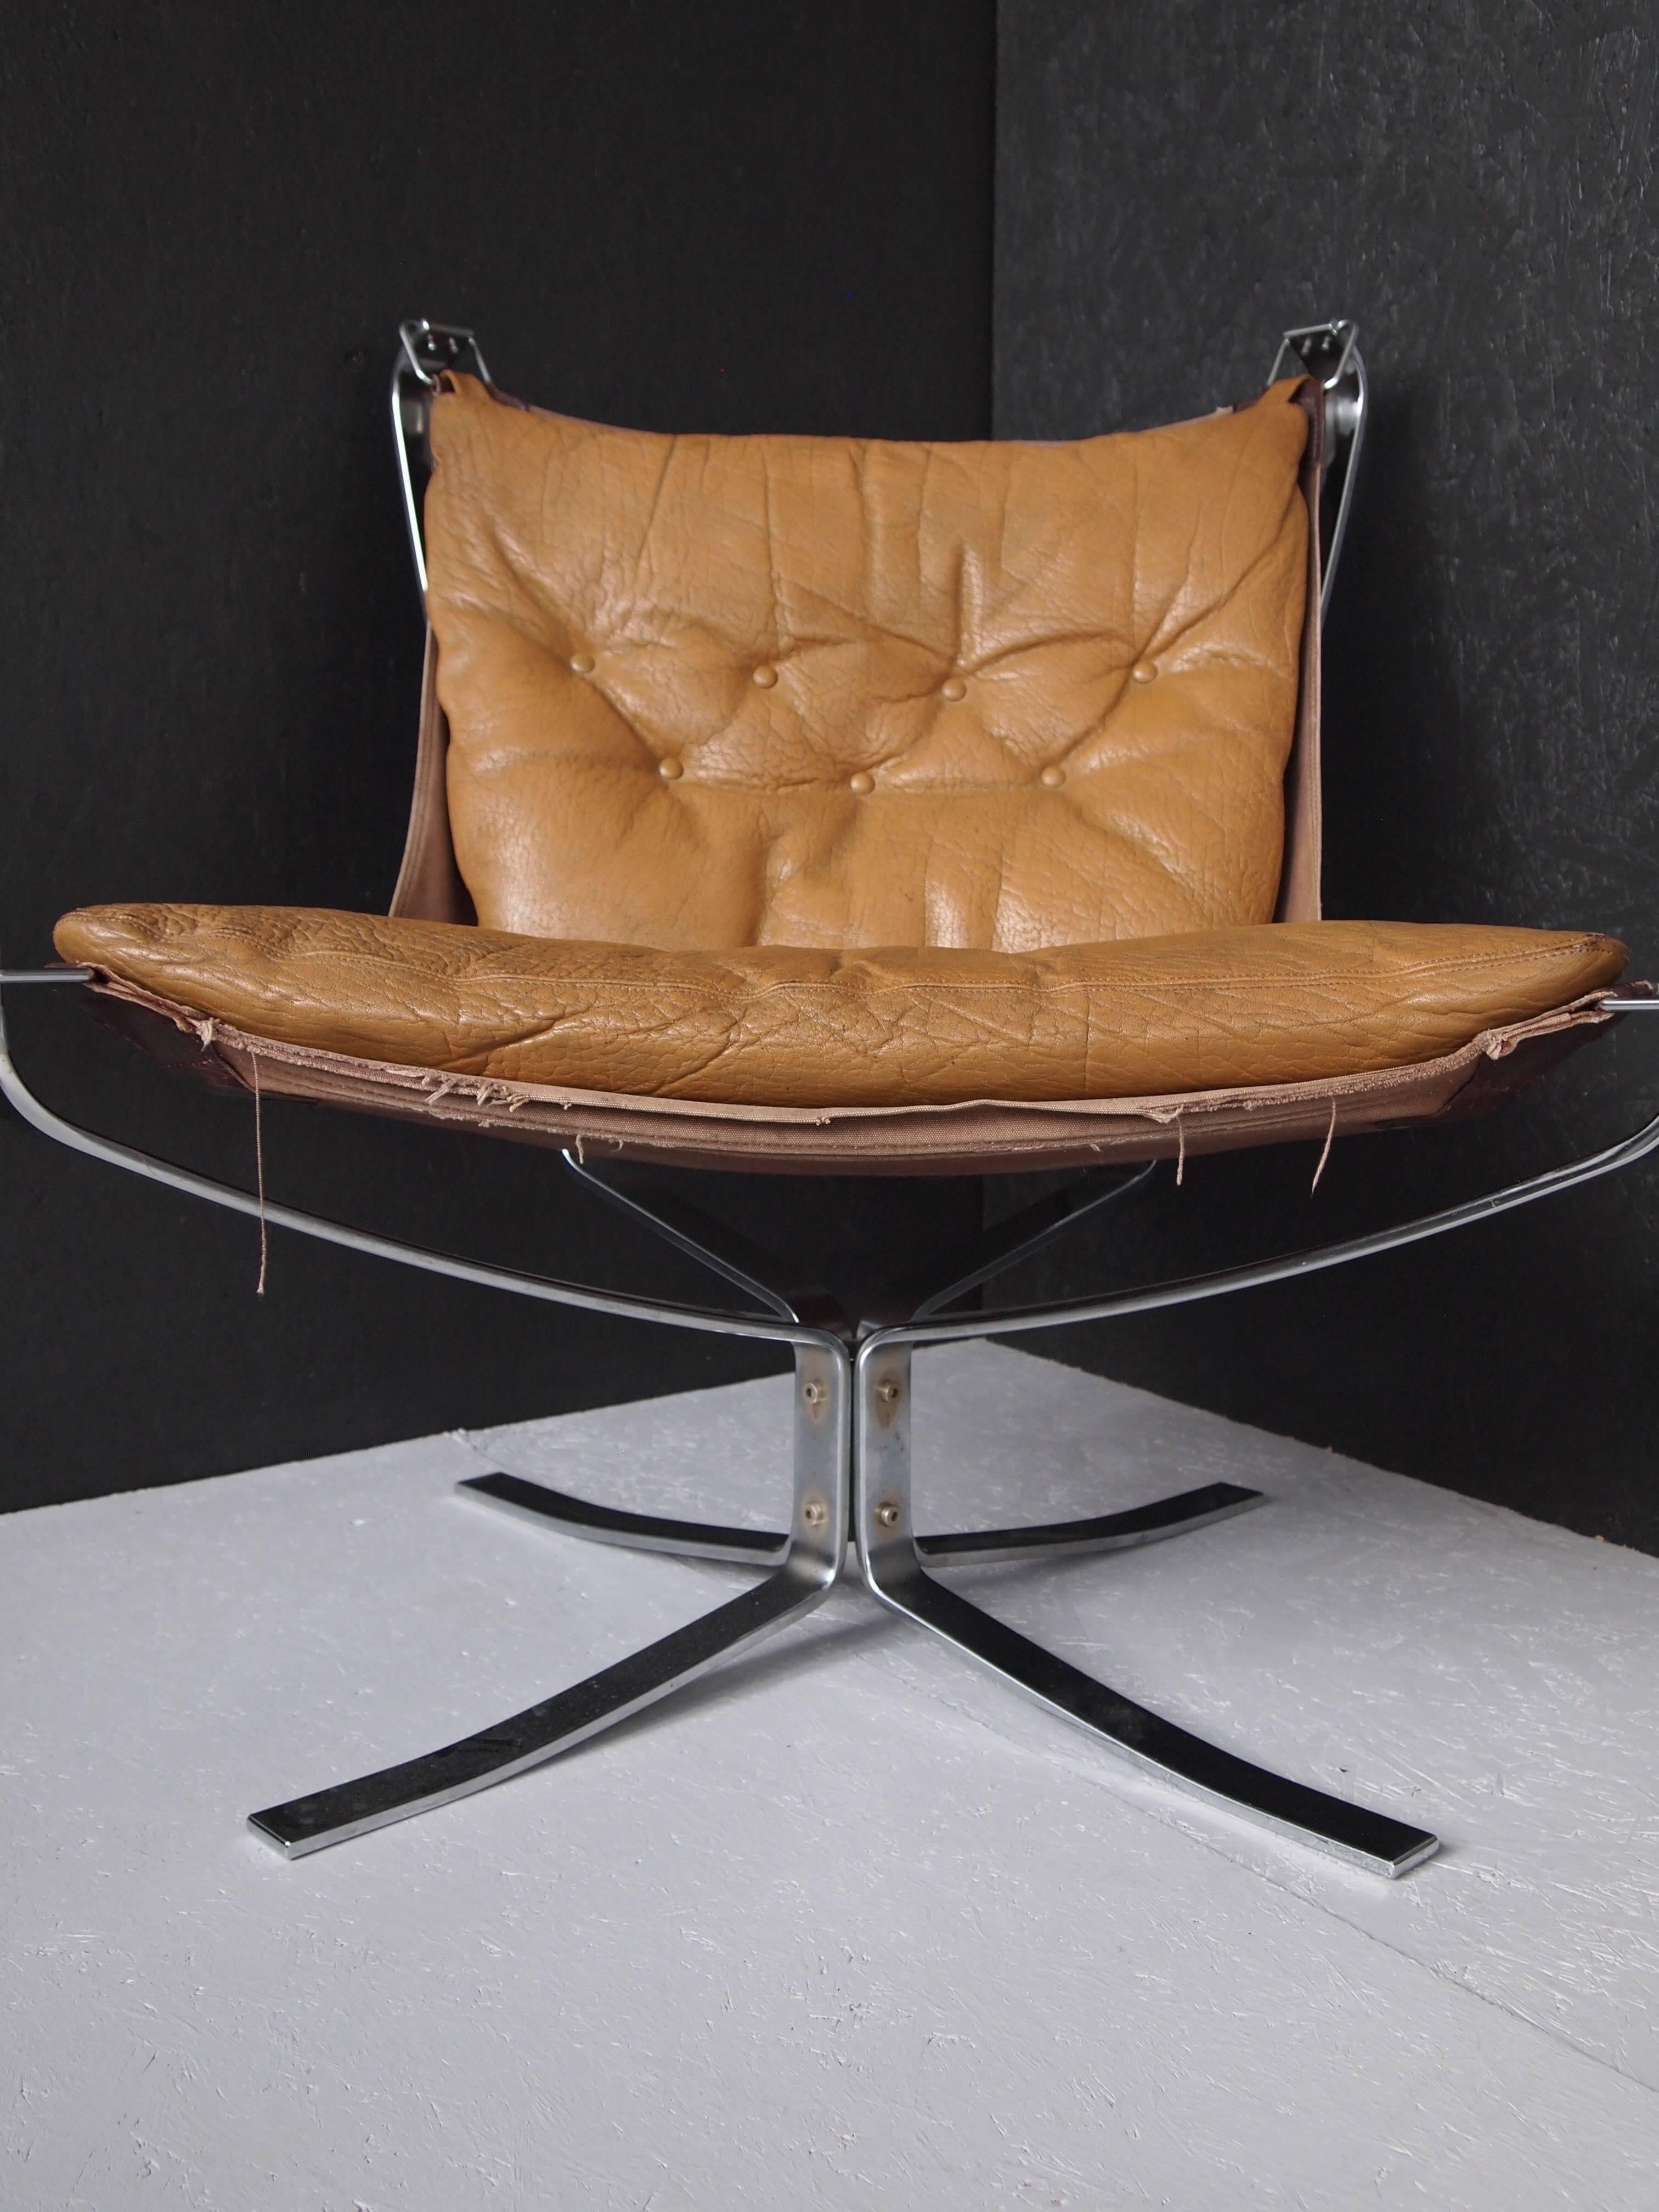 Beautiful and unique Falcon chair with the right details, steel and tan leather makes all the difference.